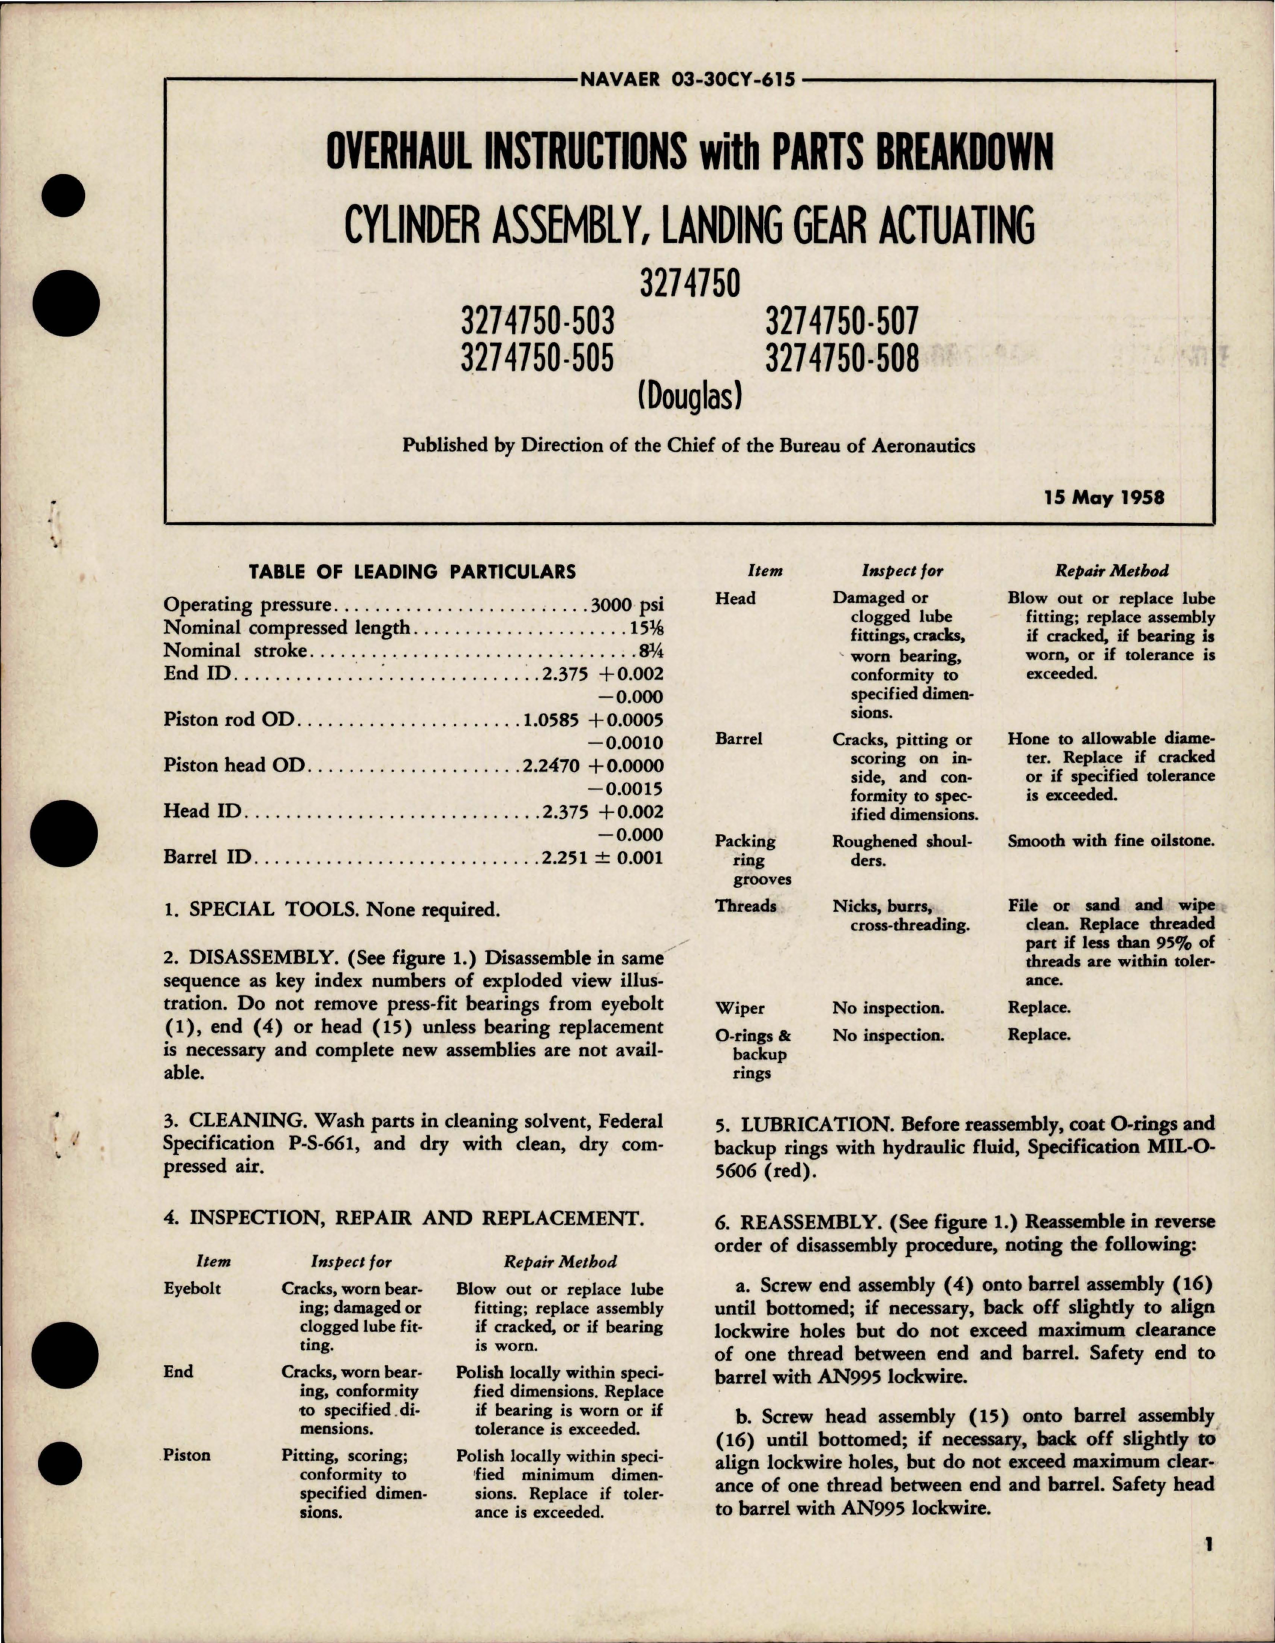 Sample page 1 from AirCorps Library document: Overhaul Instructions with Parts for Landing Gear Actuating Cylinder Assembly